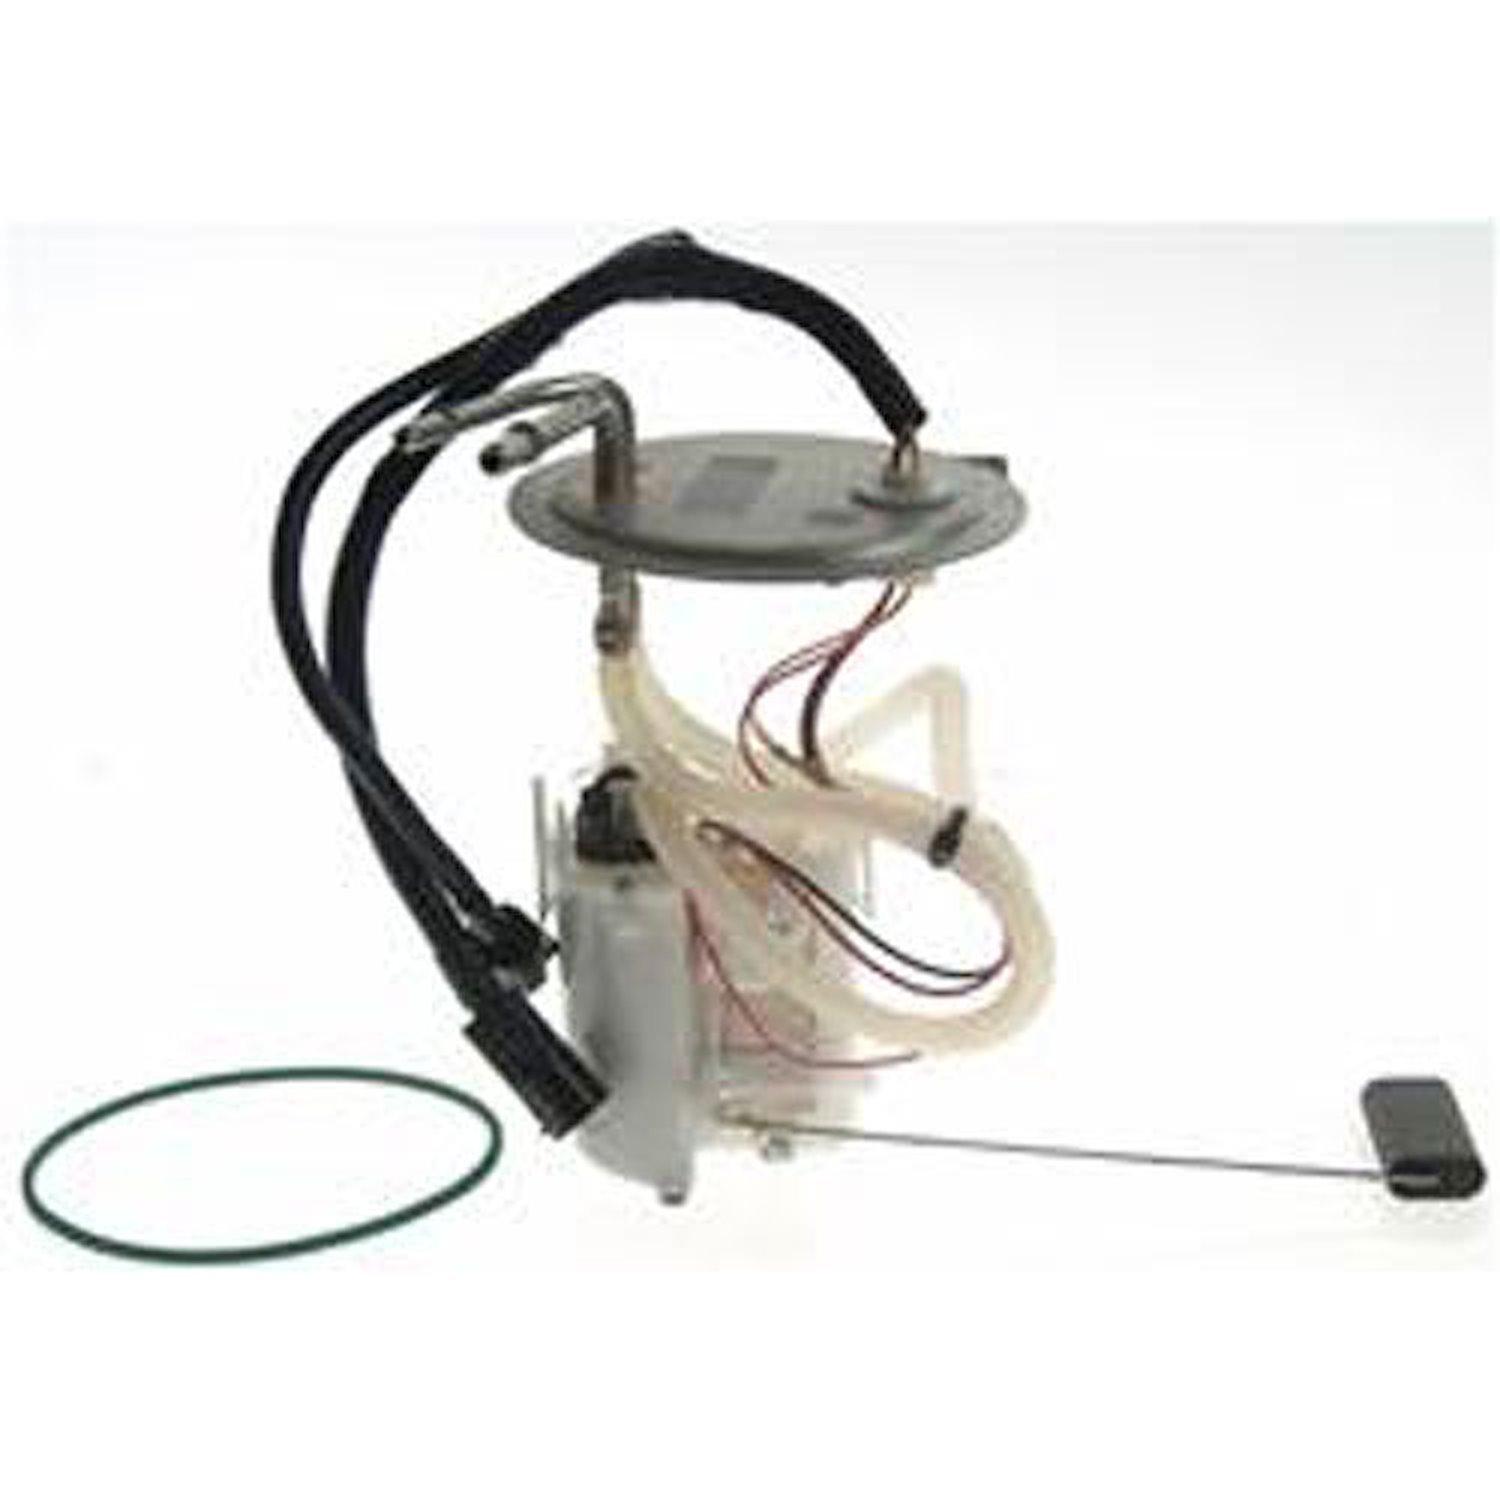 OE Ford Replacement Electric Fuel Pump Module Assembly 1999-04 Ford F250/F350/F450/F550 Super Duty 5.4L/6.8L V8